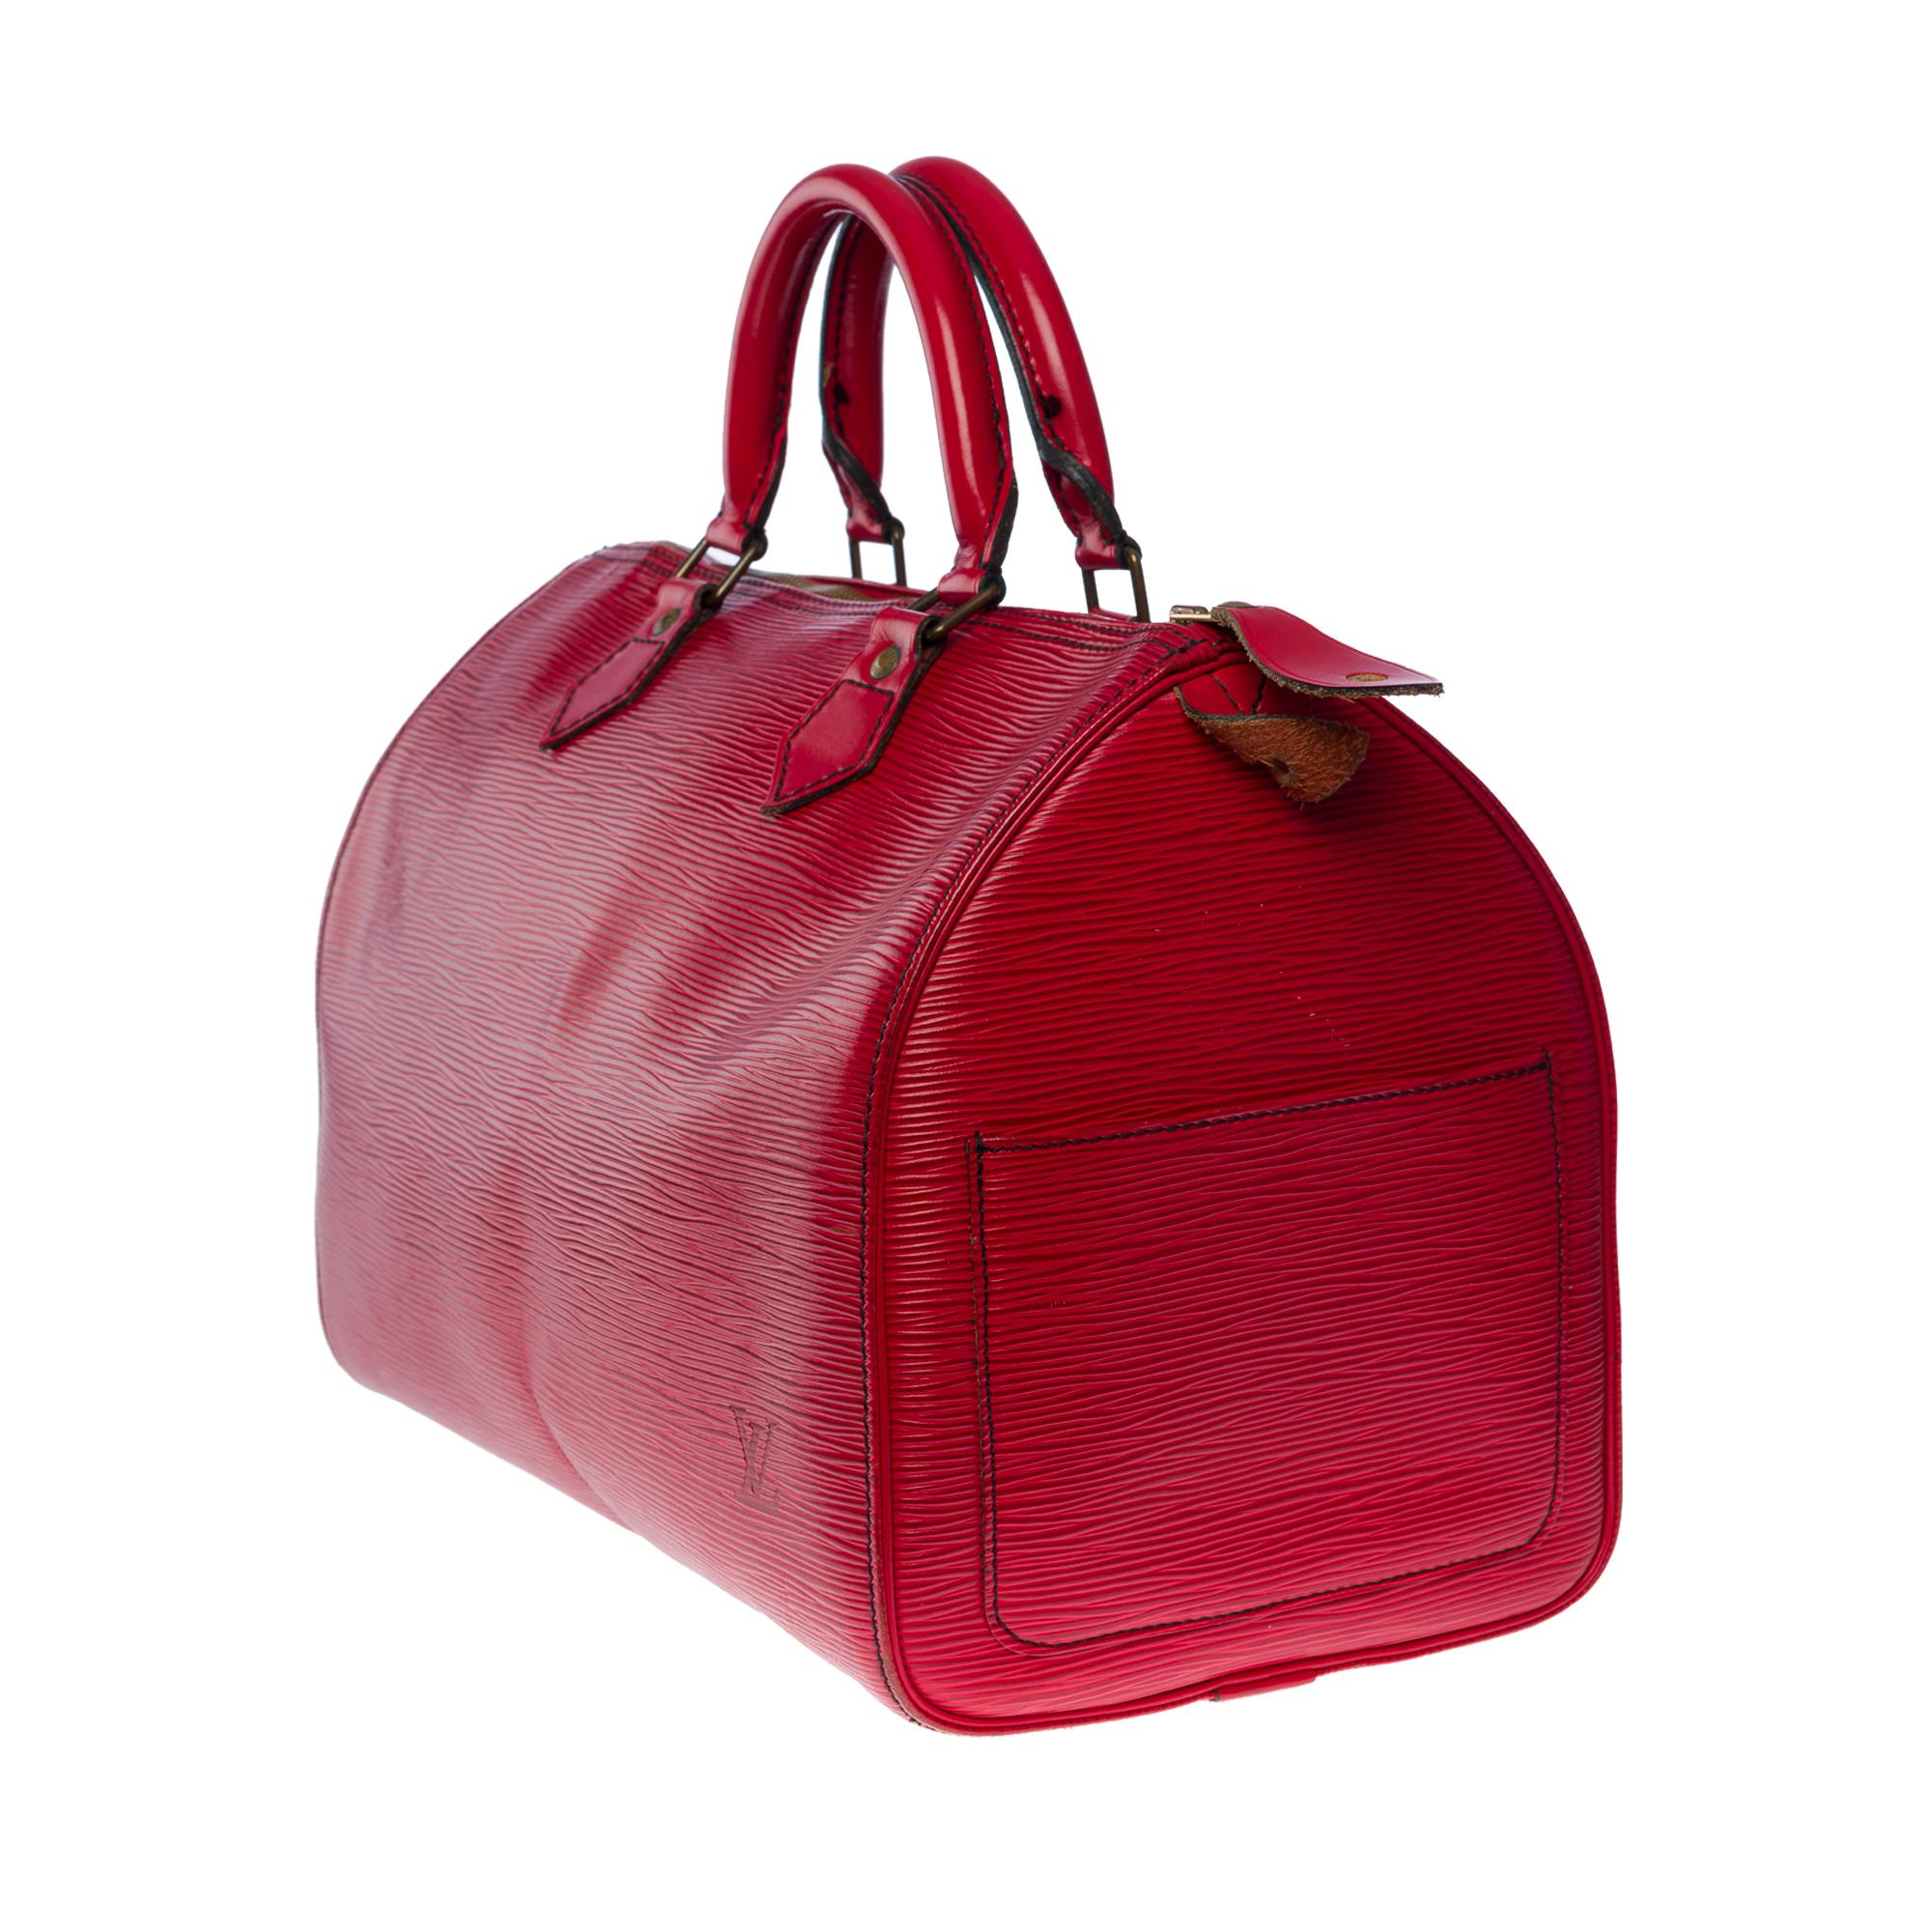 Women's or Men's Gorgeous Louis Vuitton Speedy 30 handbag in red epi leather and gold hardware